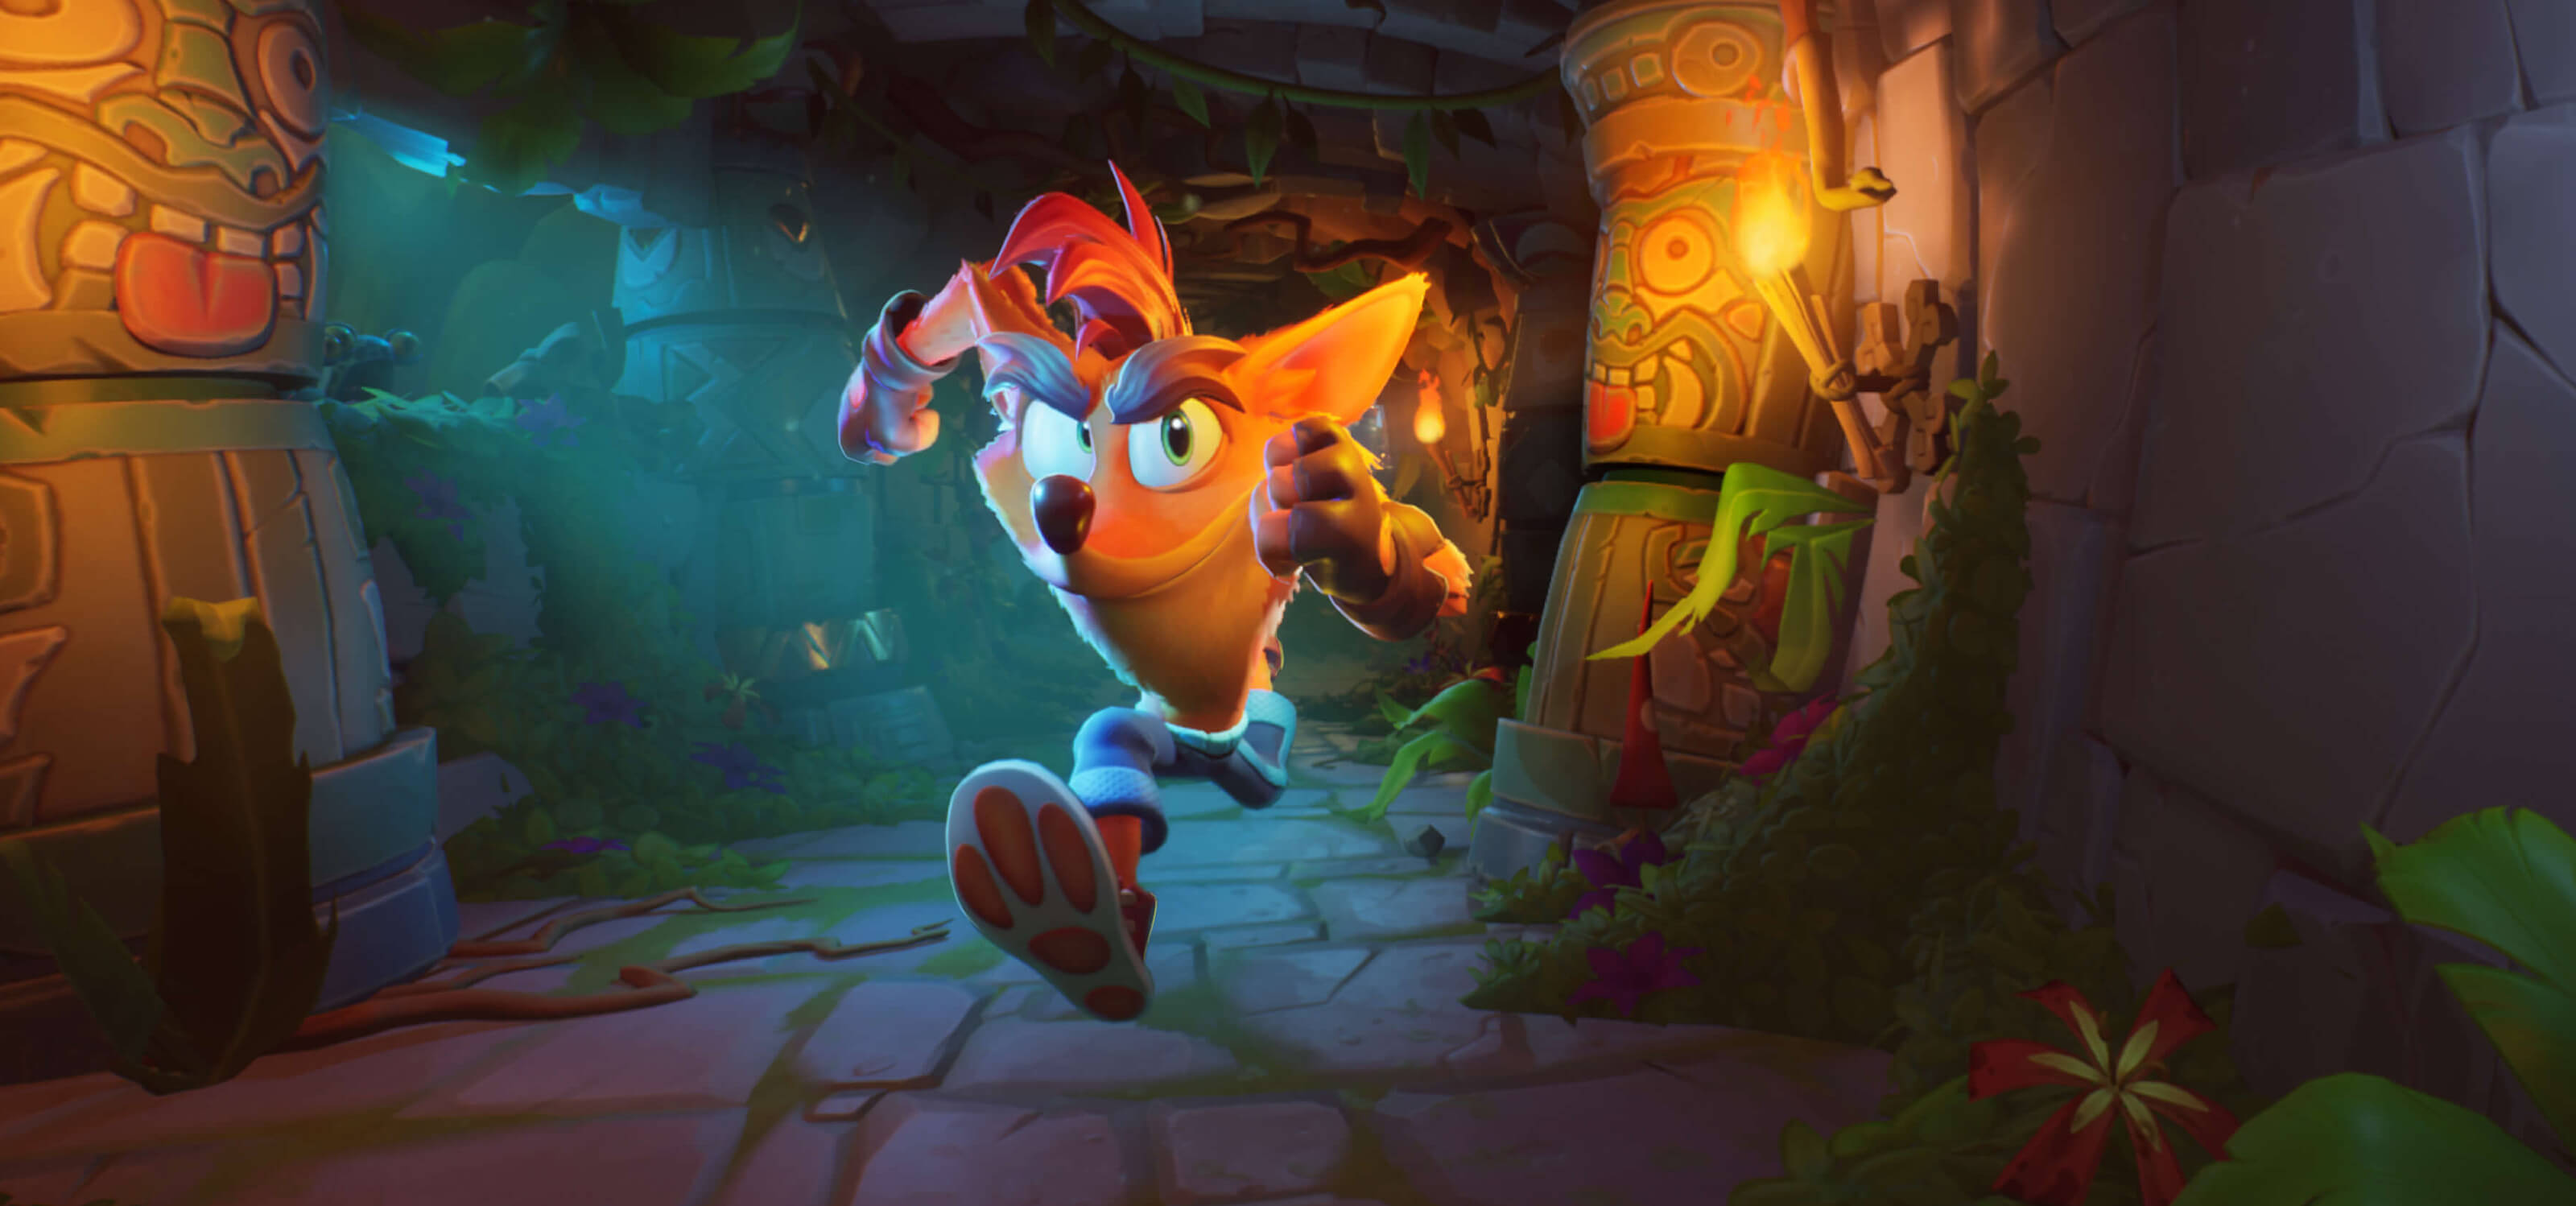 A screenshot from Crash Bandicoot 4: It’s About Time depicting Crash running down a temple hallway.